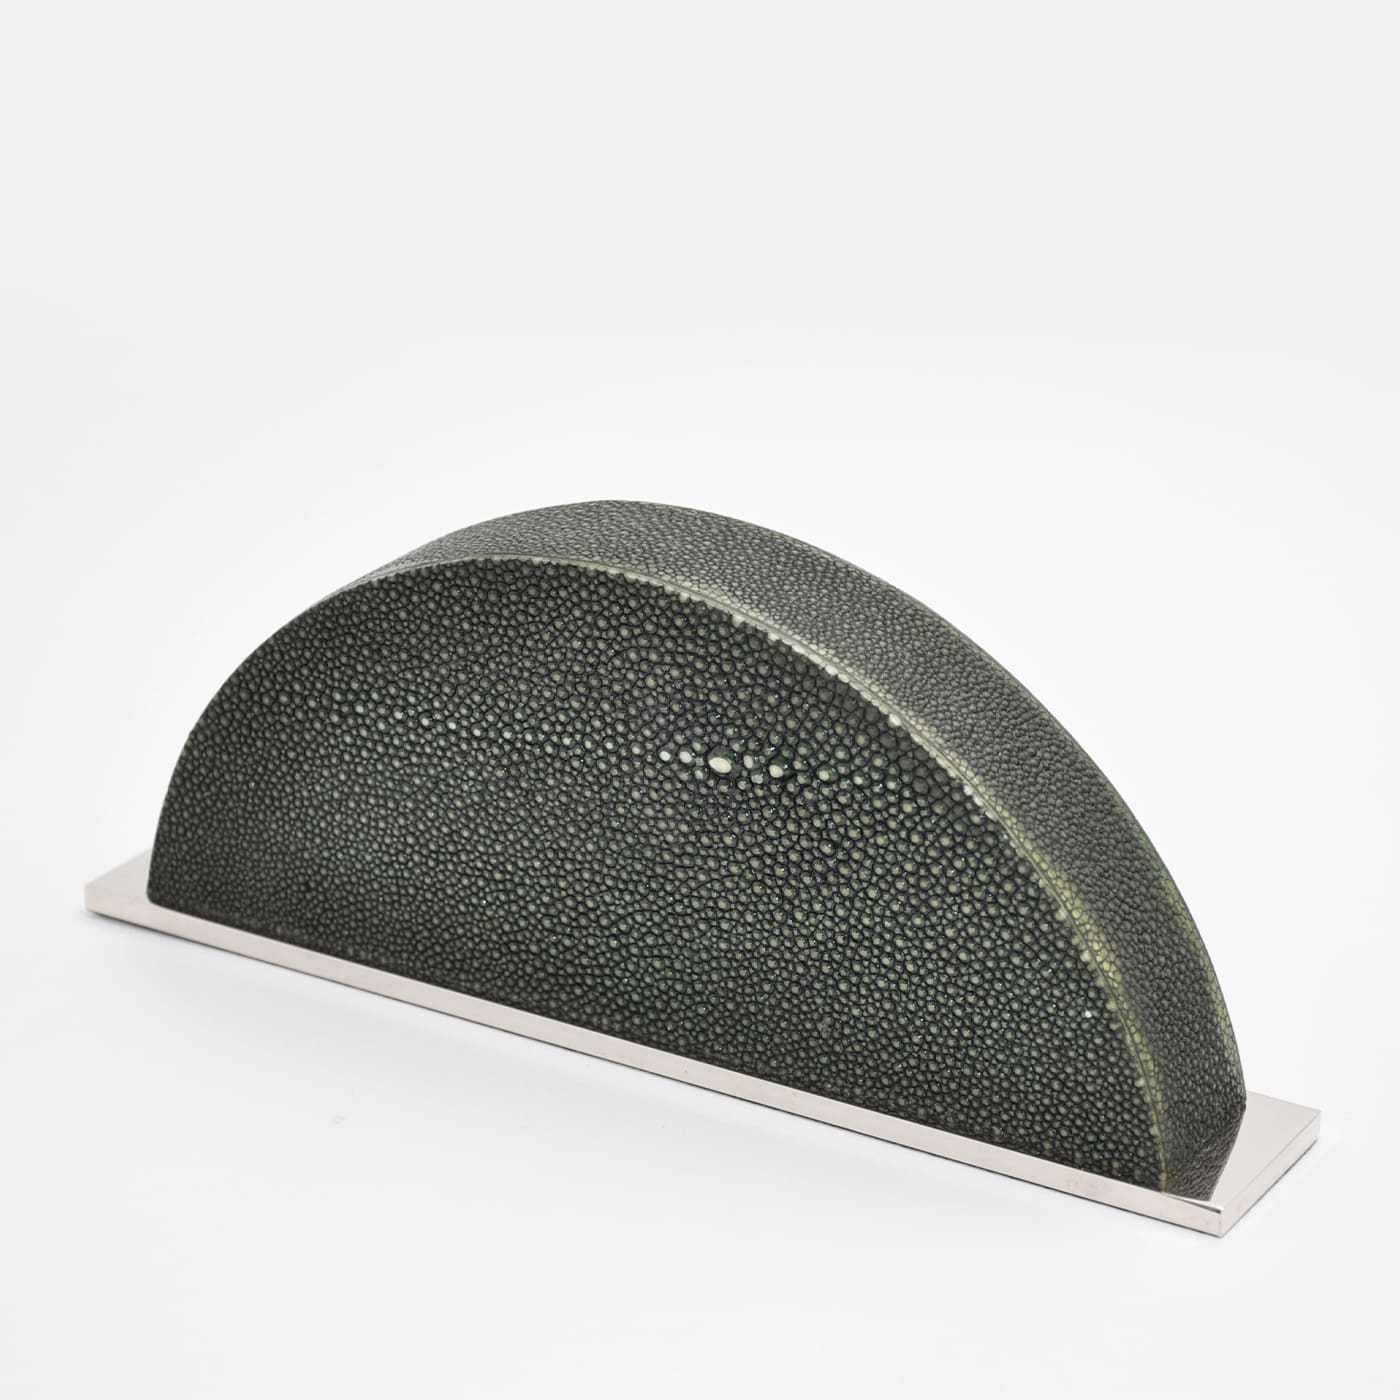 Galucharme Forest-Green Shagreen Table Clock by Nino Basso - Design Center 1991